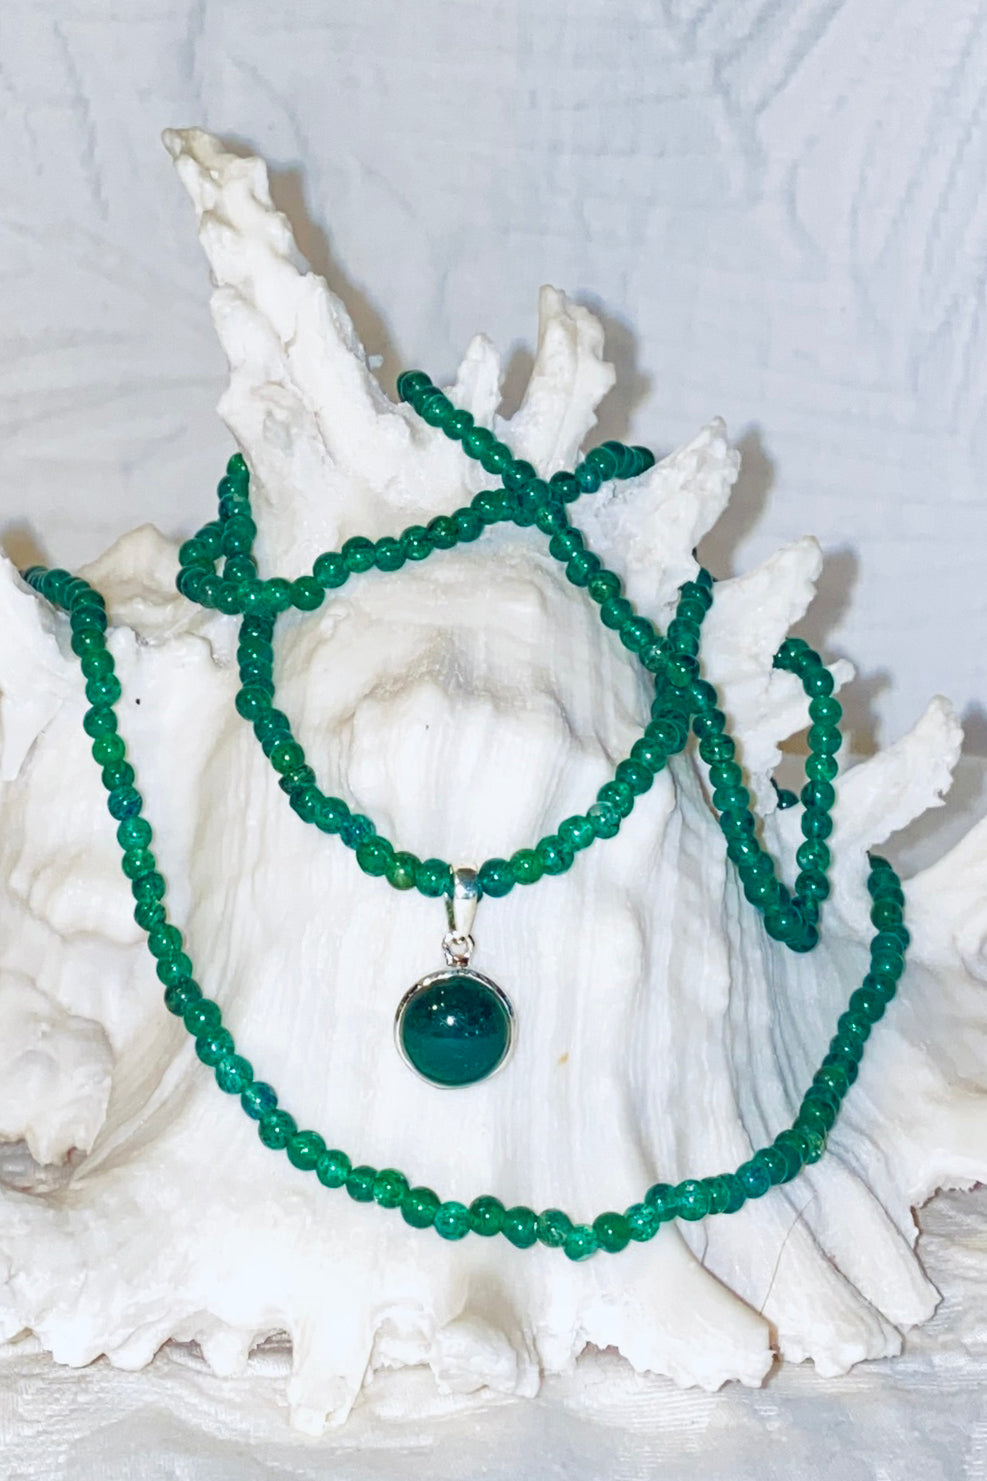 Indian Jade Necklace with Pendant